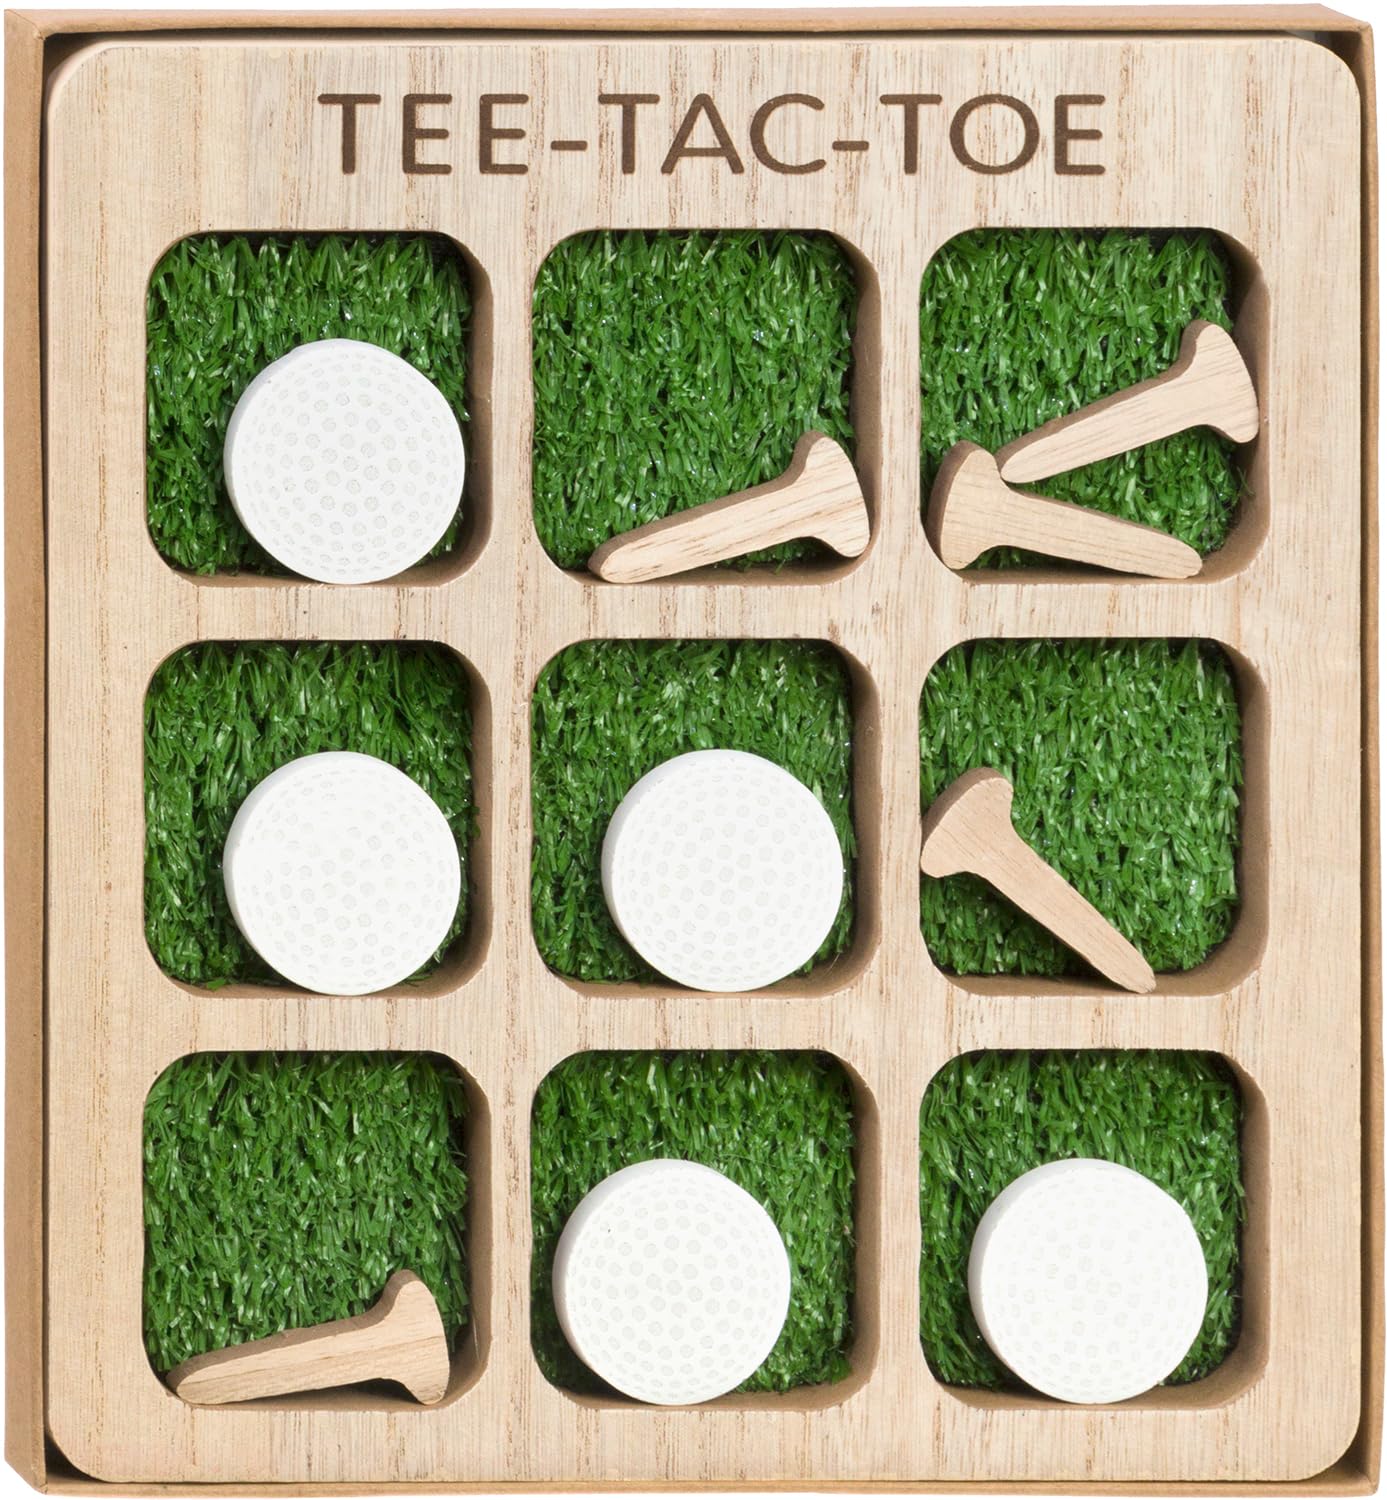 8.5x9-Inch Tic Tac Toe Wood Board Game for Kids and Family Image